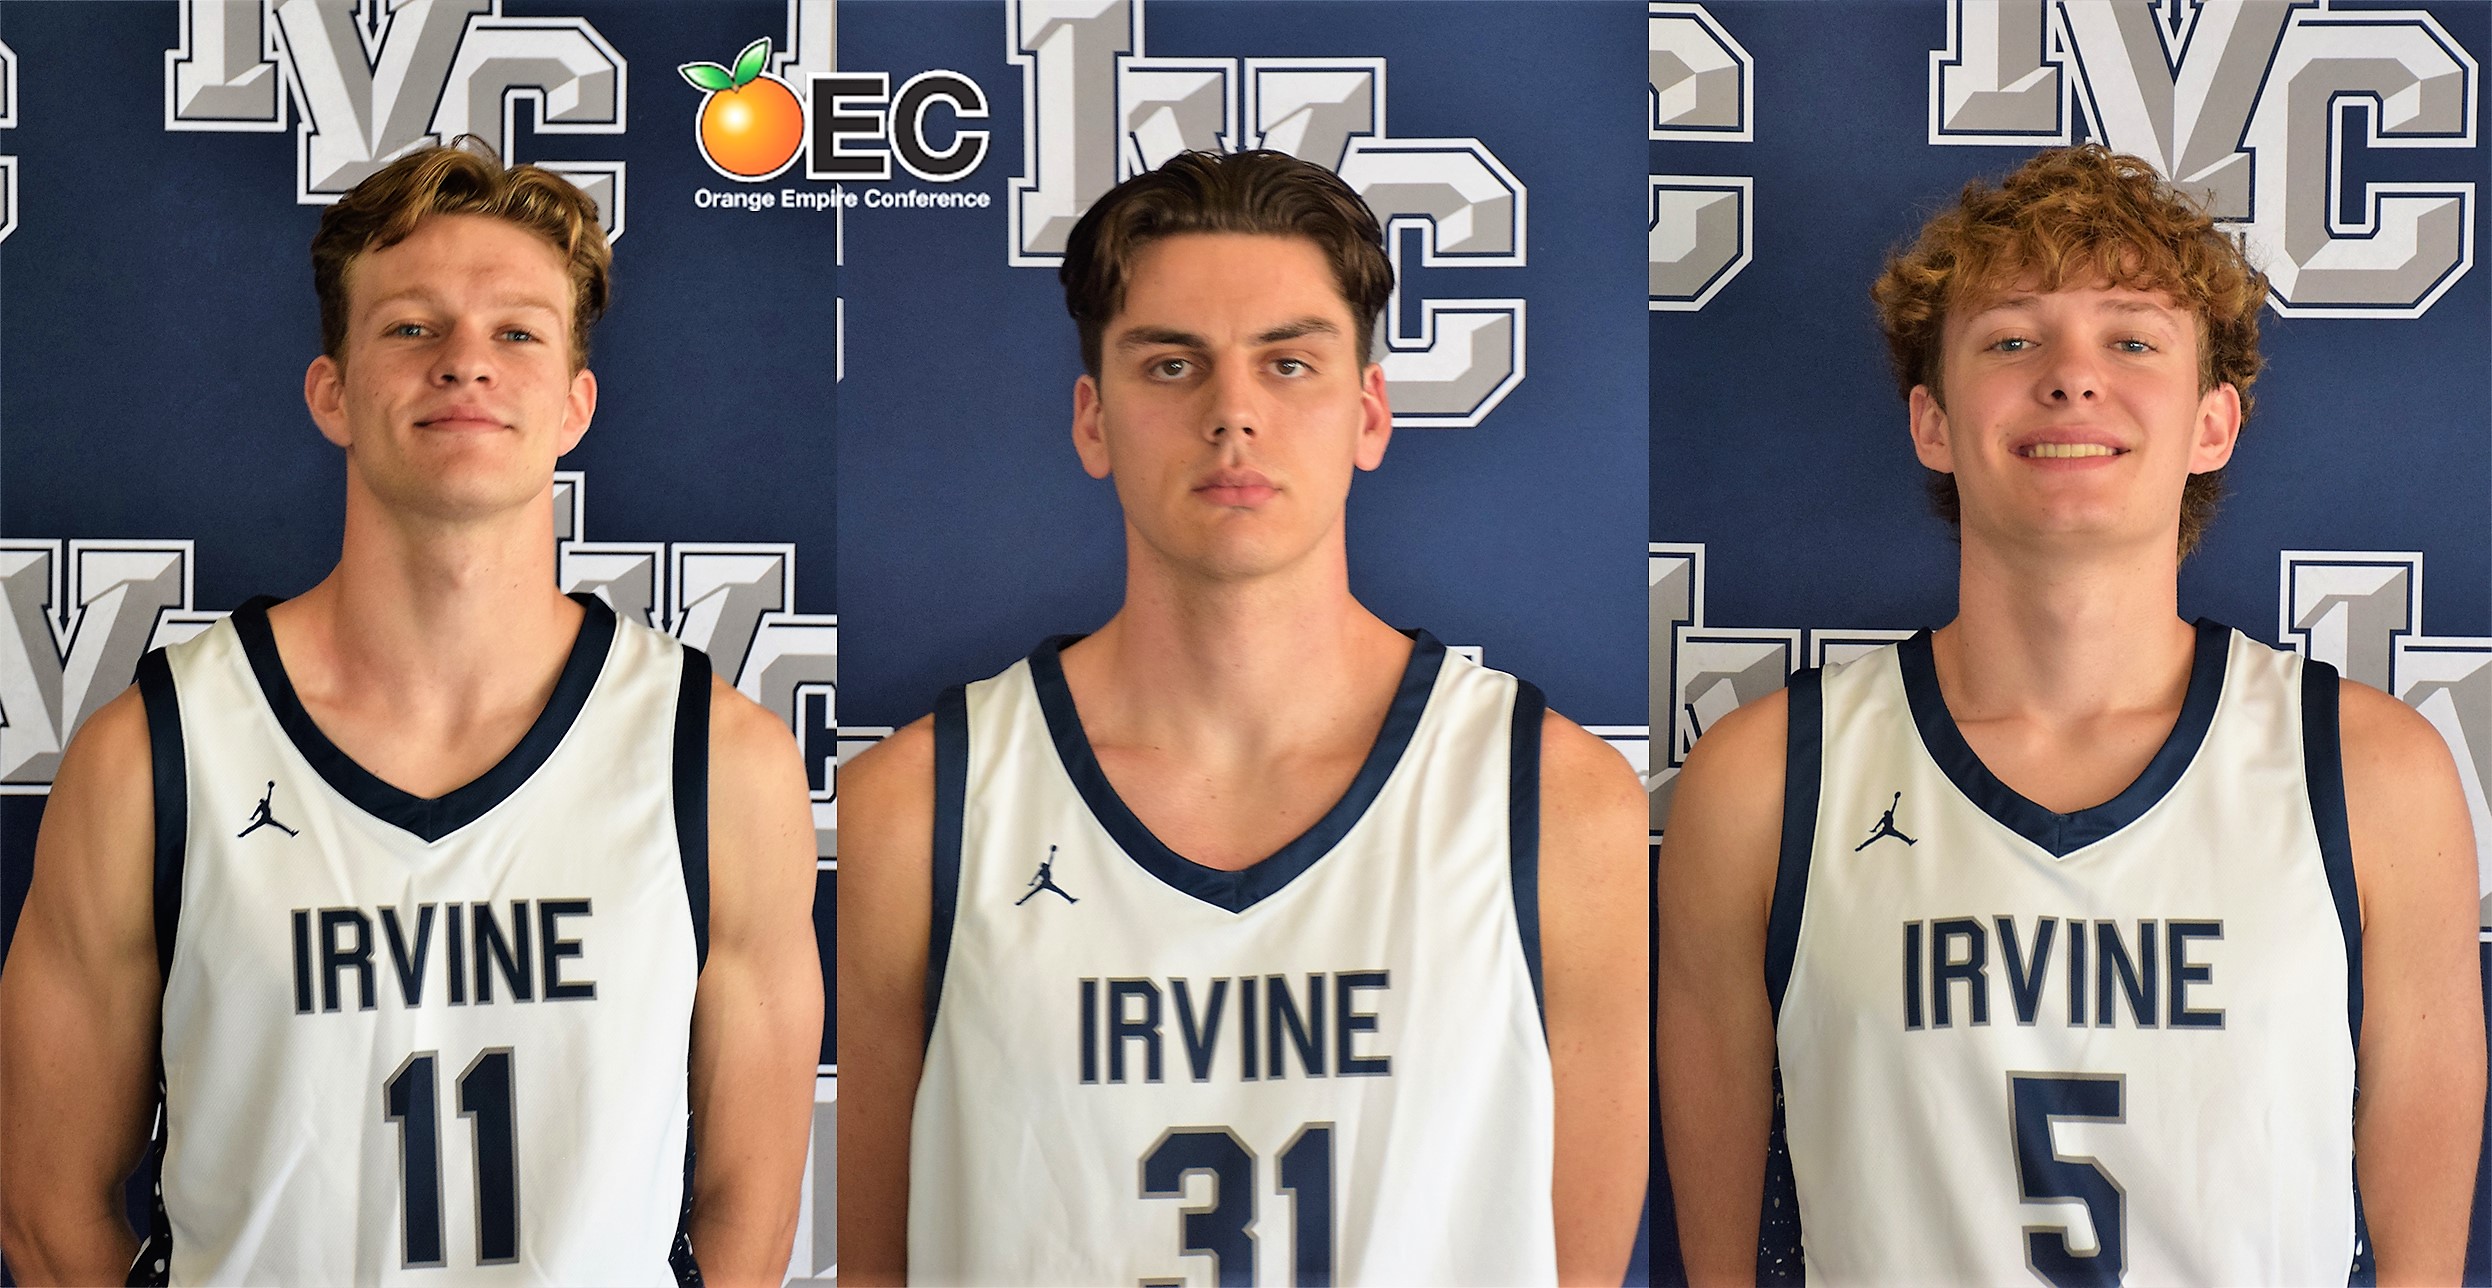 Three men's basketball players selected to all-OEC teams